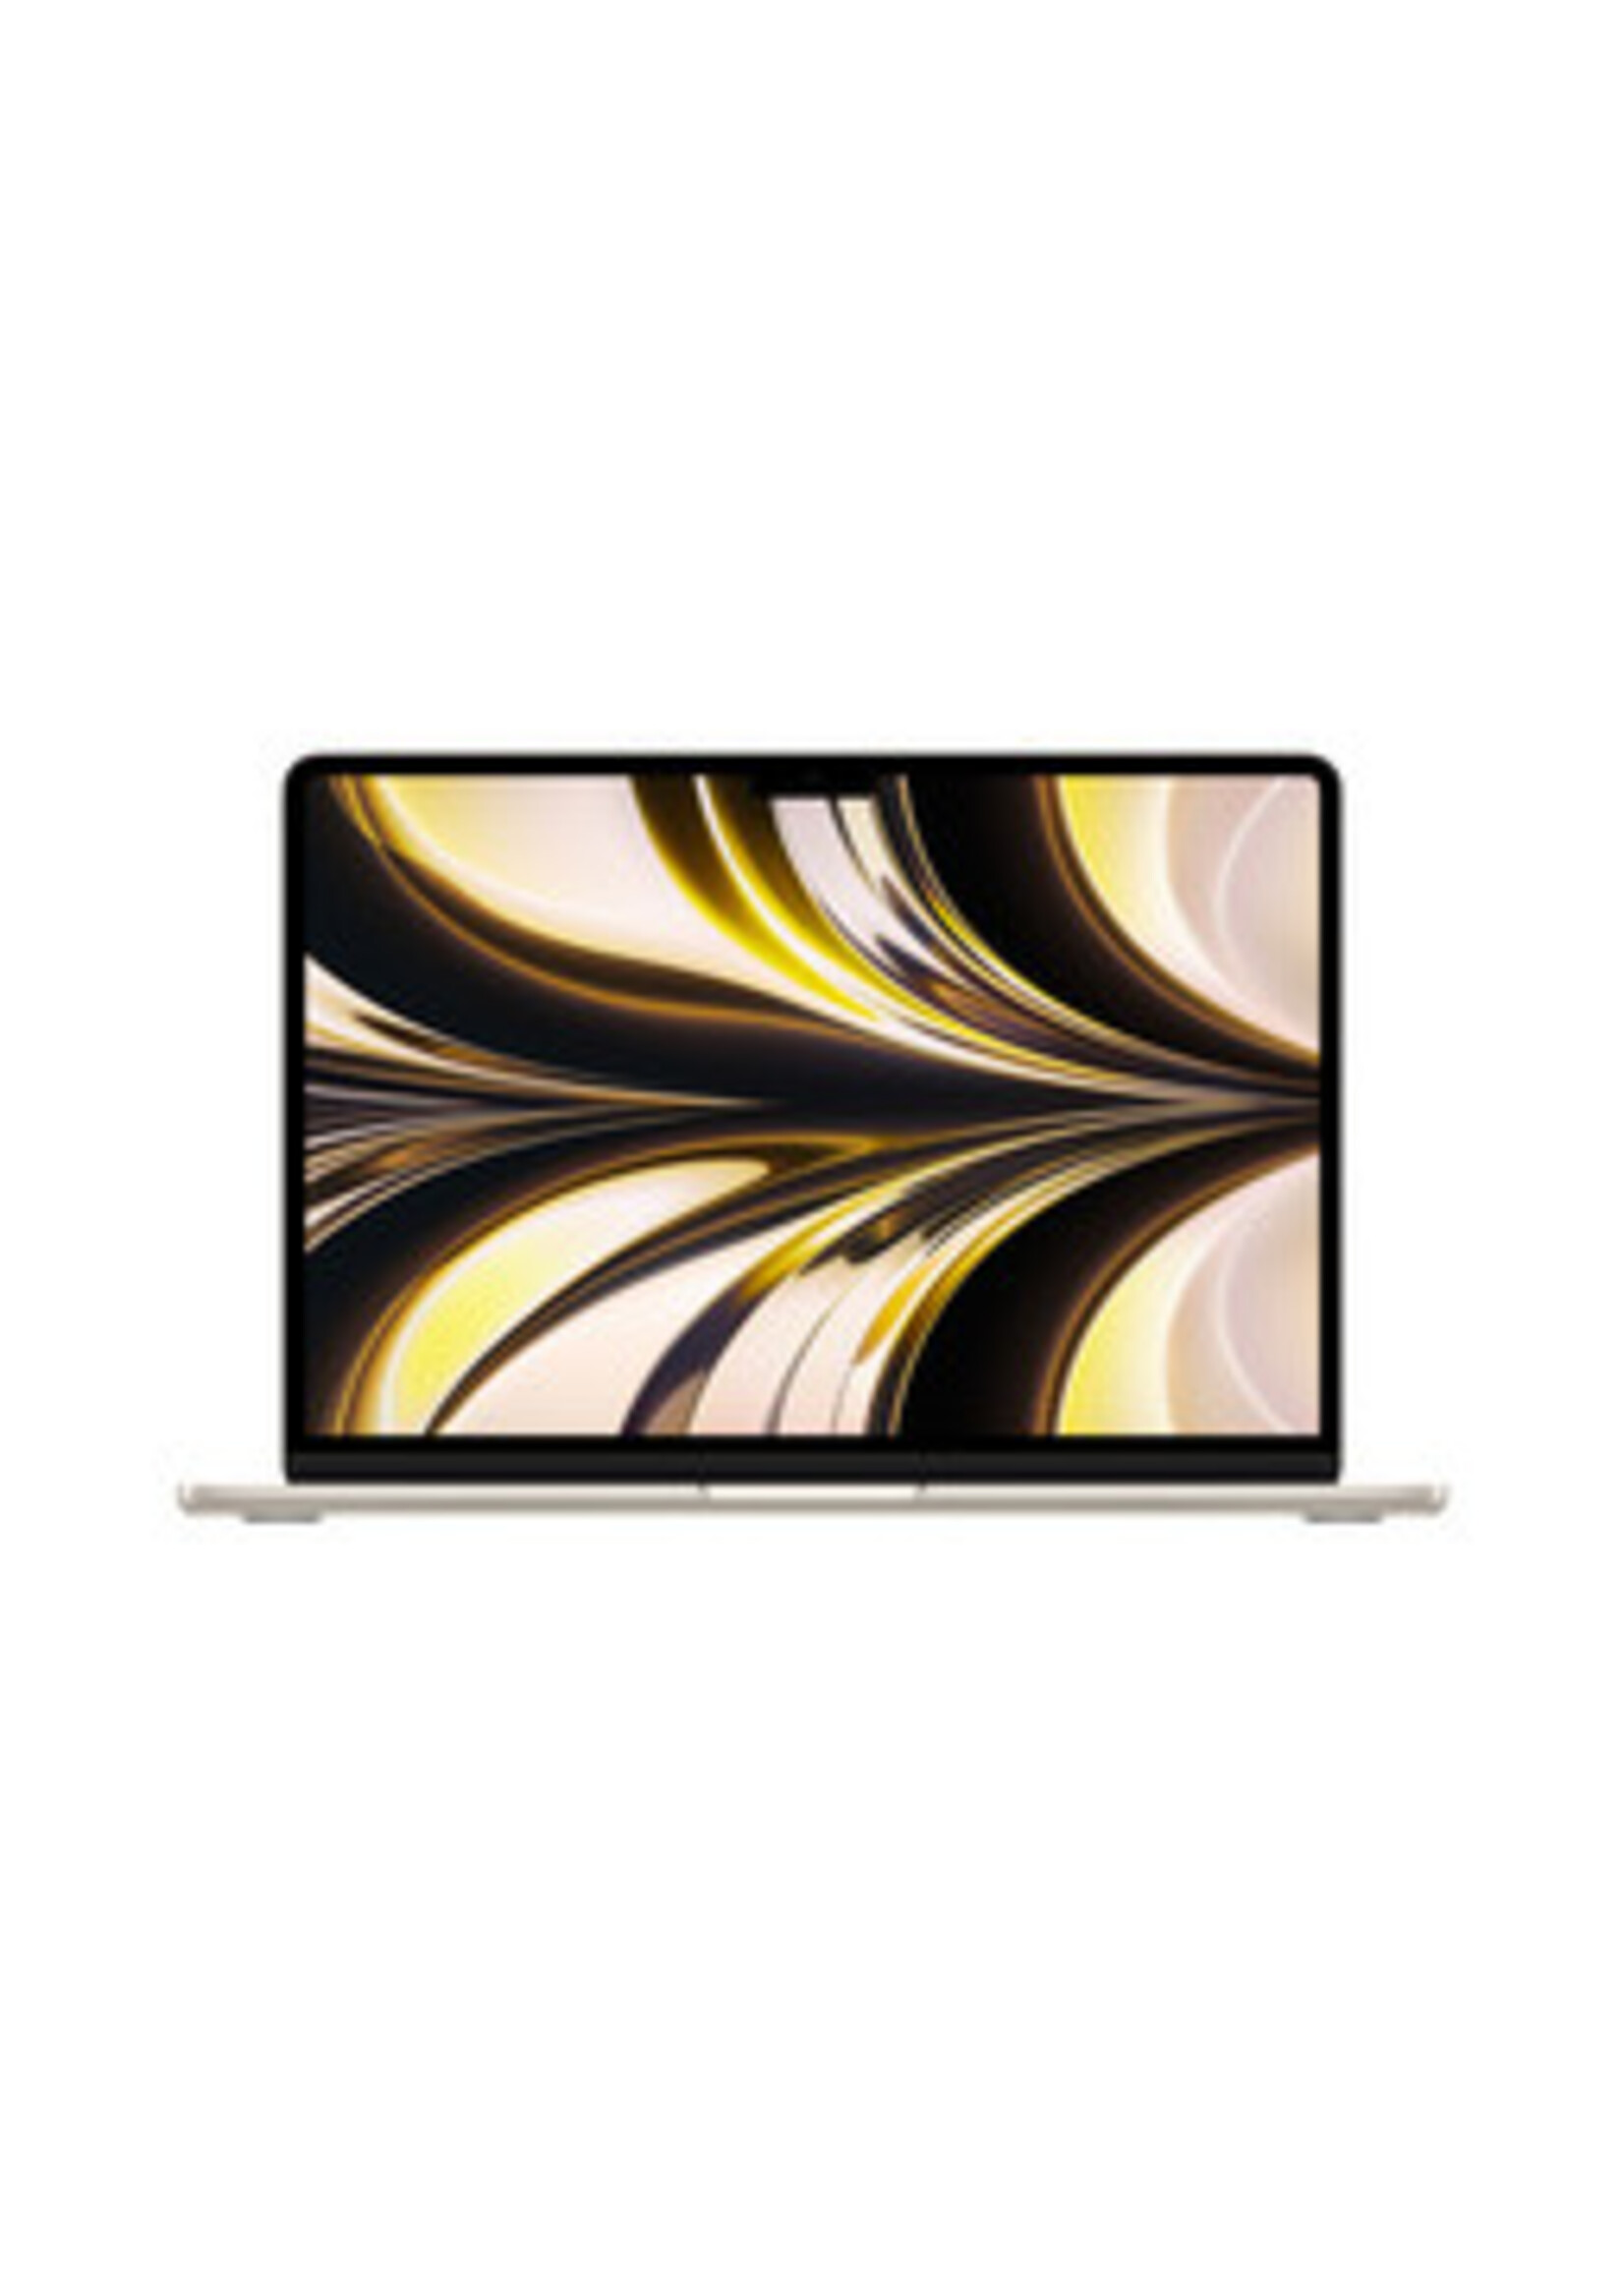 Apple 13-inch MacBook Air: Apple M2 chip with 8-core CPU and 10-core GPU, 512GB - Starlight (June 2022) w/3-Year AppleCare+ and 16GB Memory